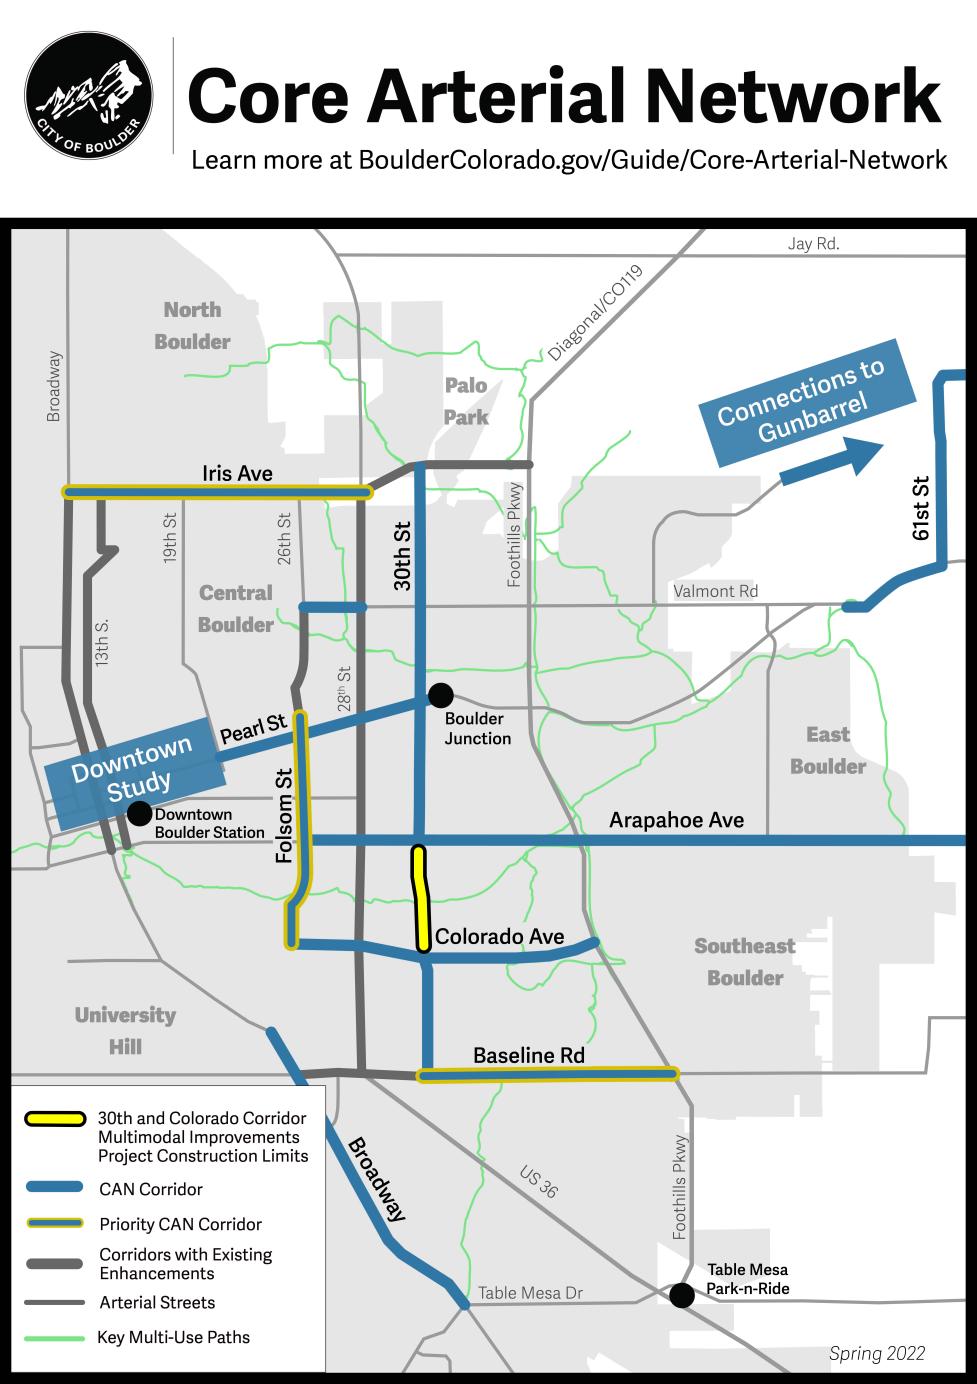 Project limits of the 30th Street Corridor Multimodal Improvements project on the Core Arterial Network. It extends on 30th Street from Arapahoe to Colorado avenues.